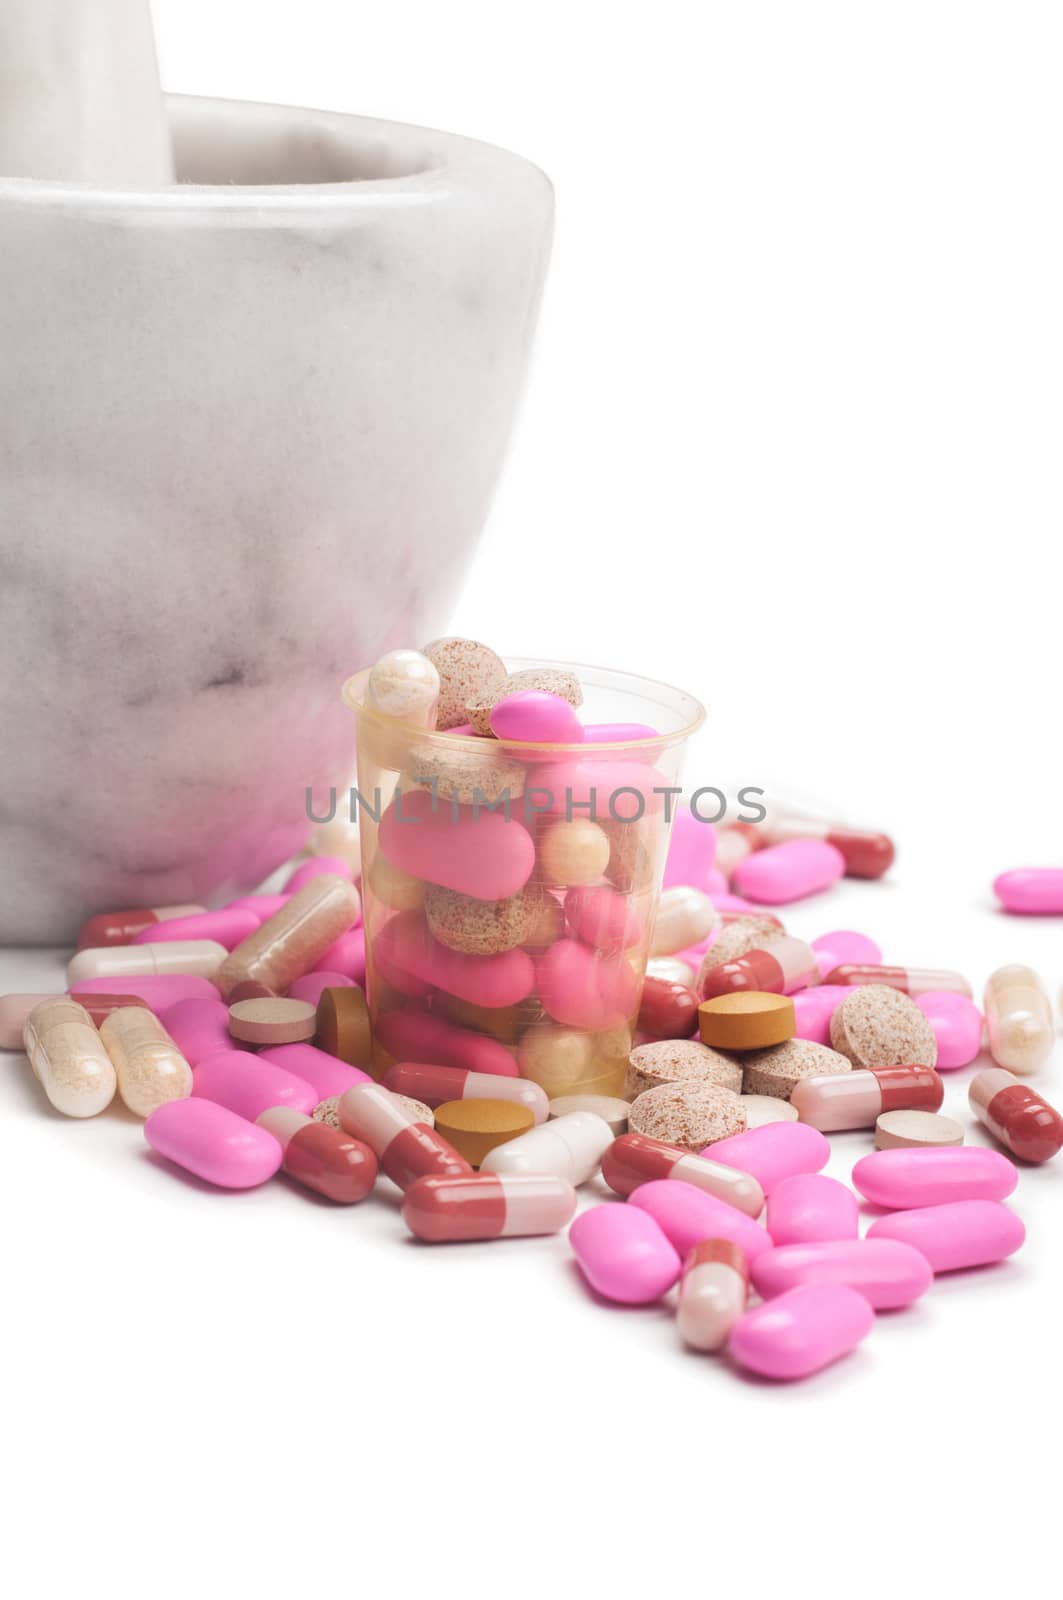 Shot of pink pills with marble mortar grinding machine